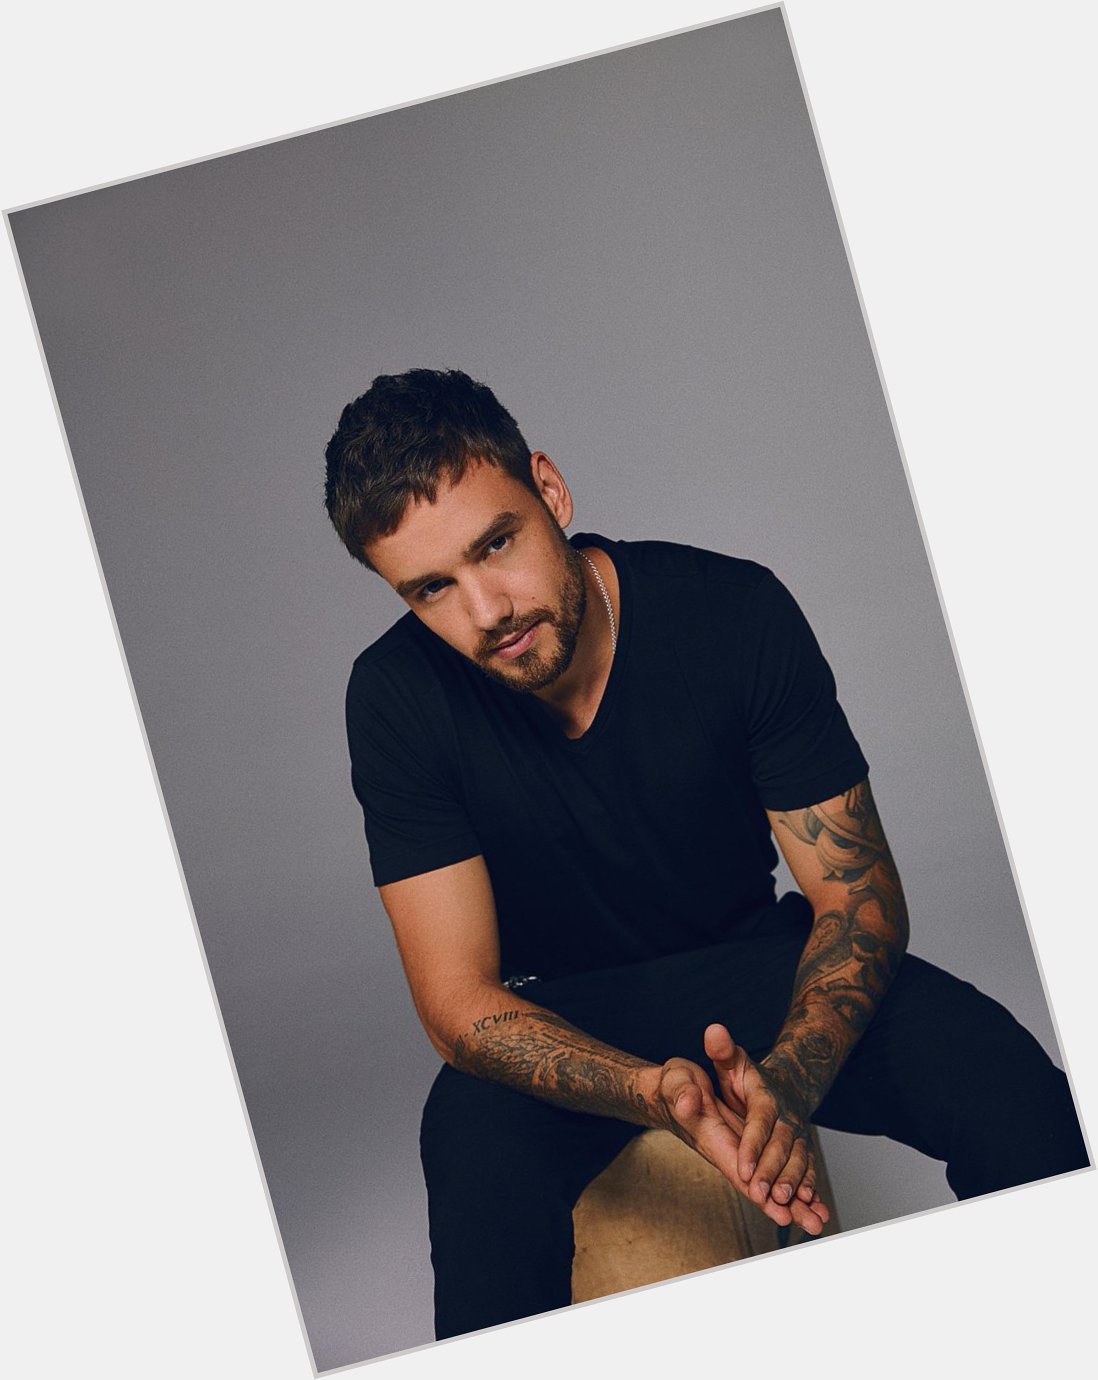 Happy 29th birthday to (Liam Payne)! The reunion of 